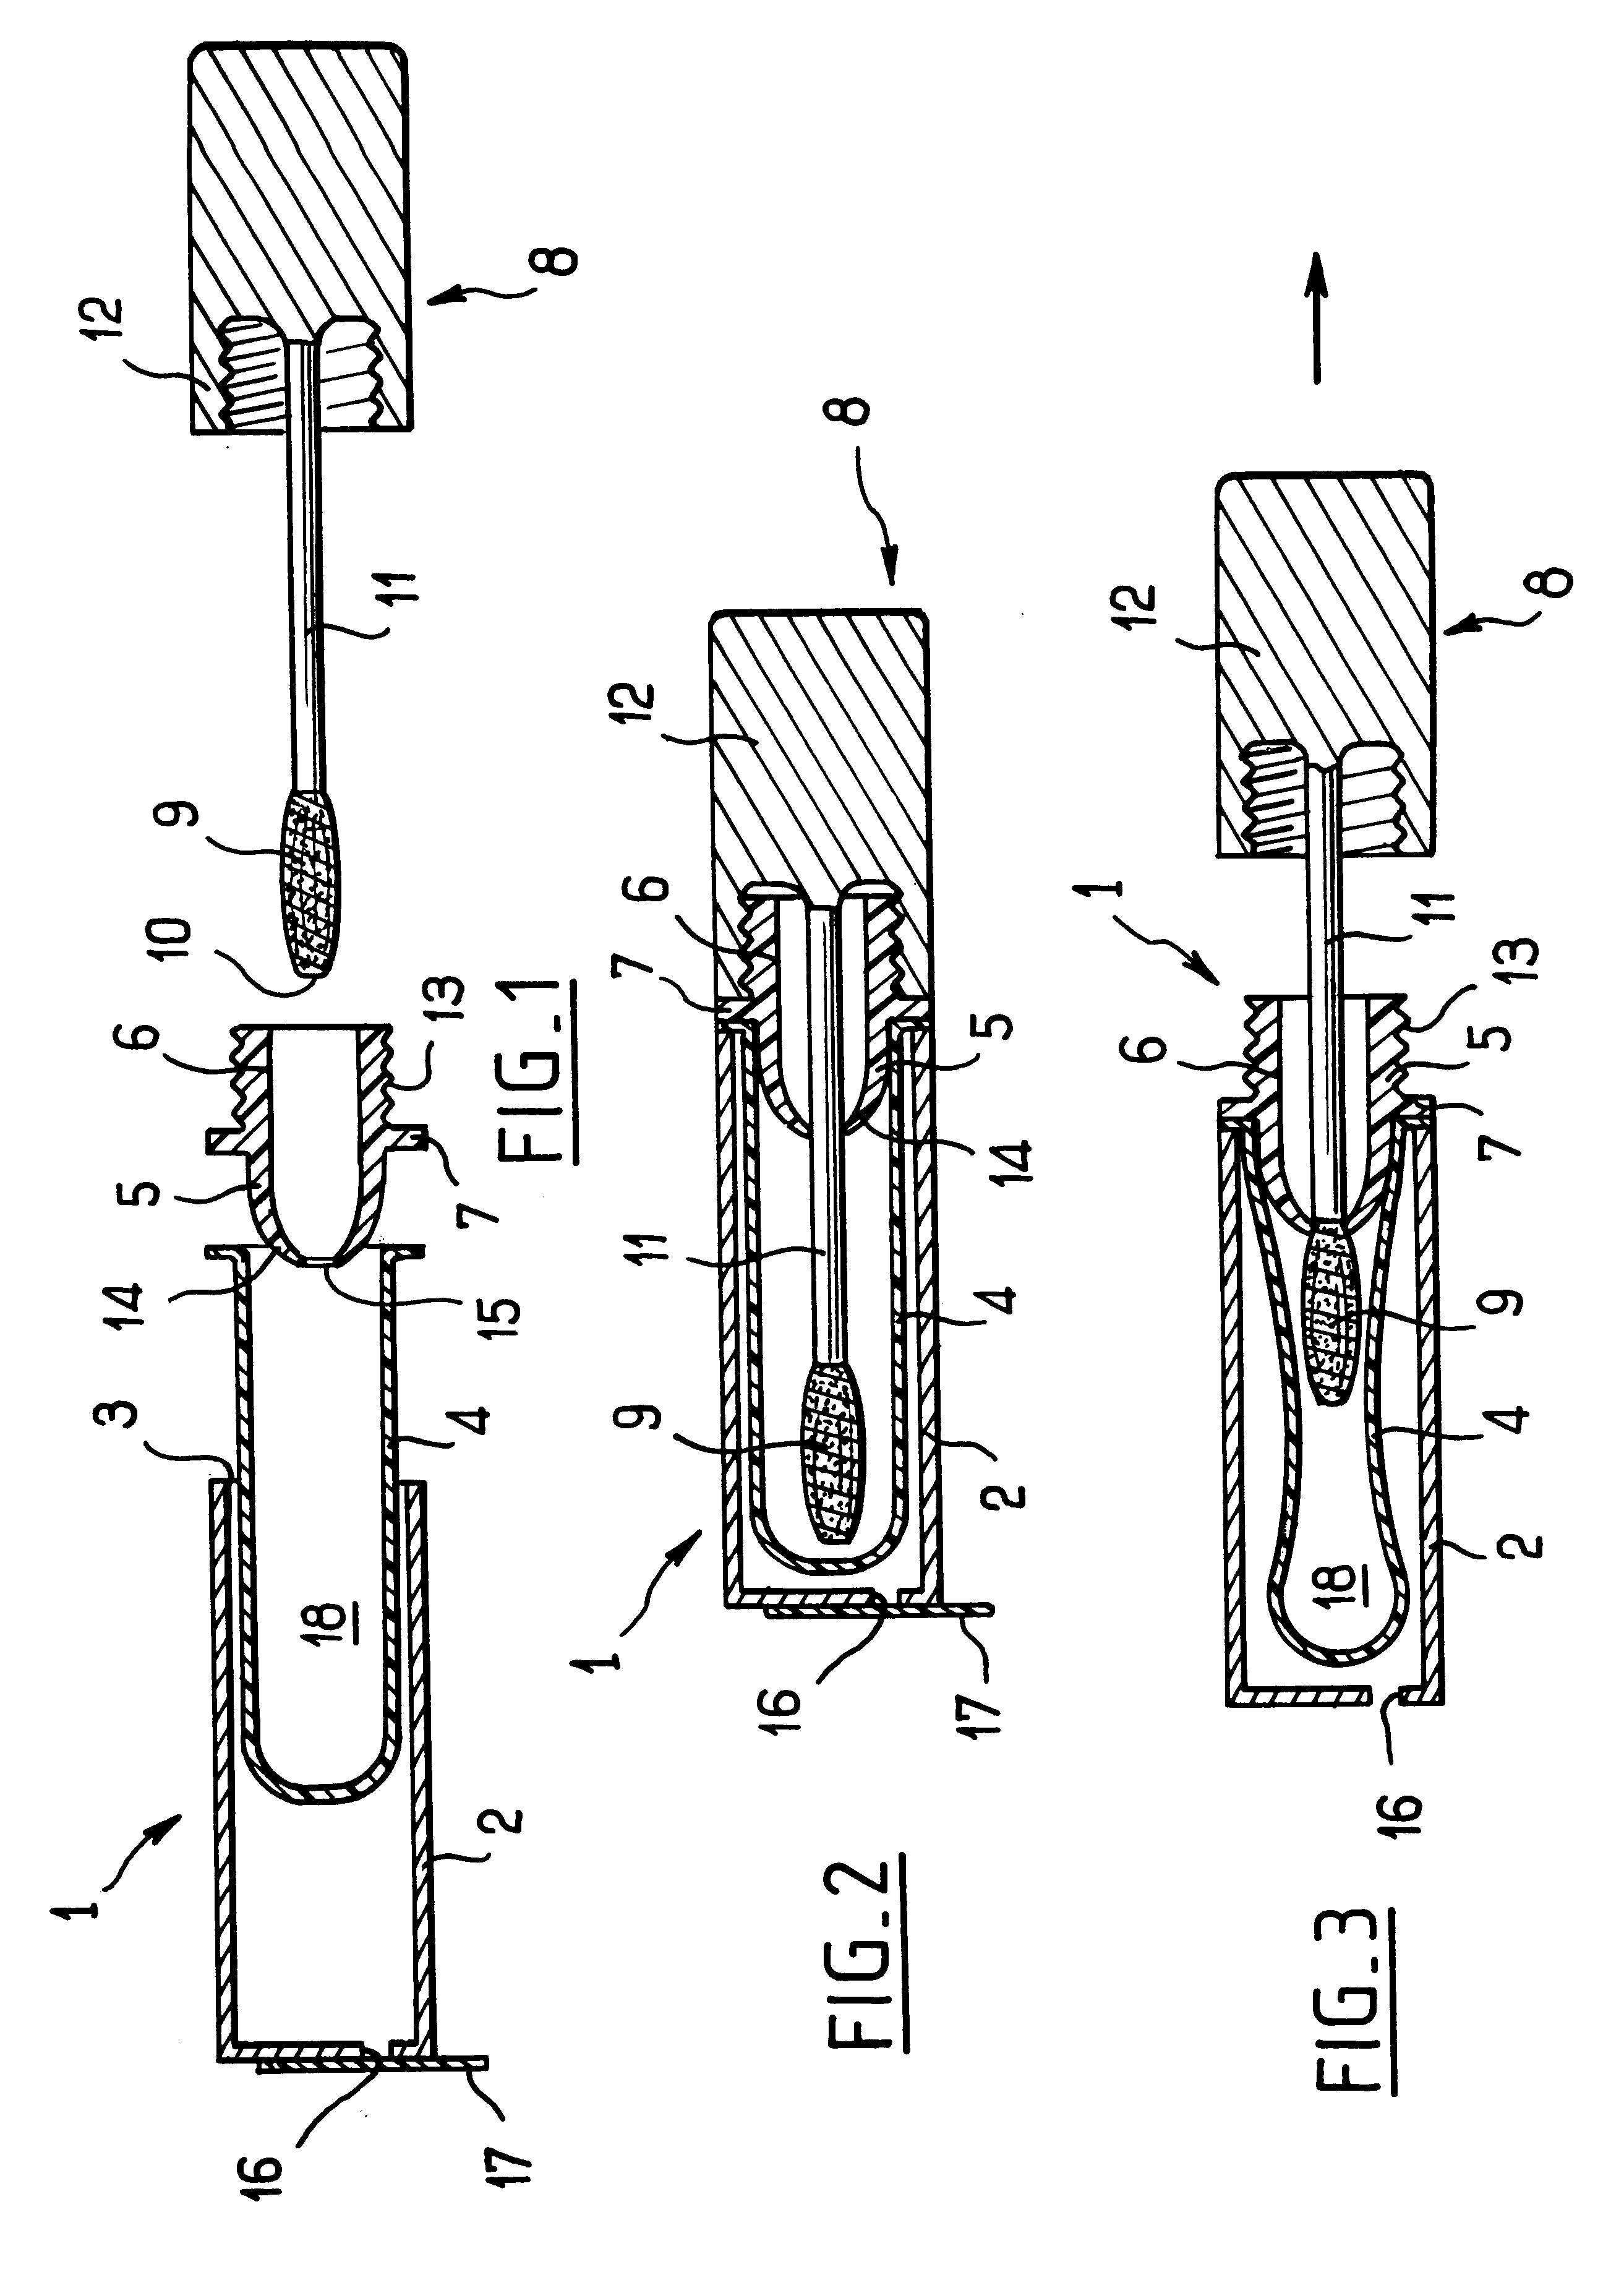 Device for packaging and applying makeup